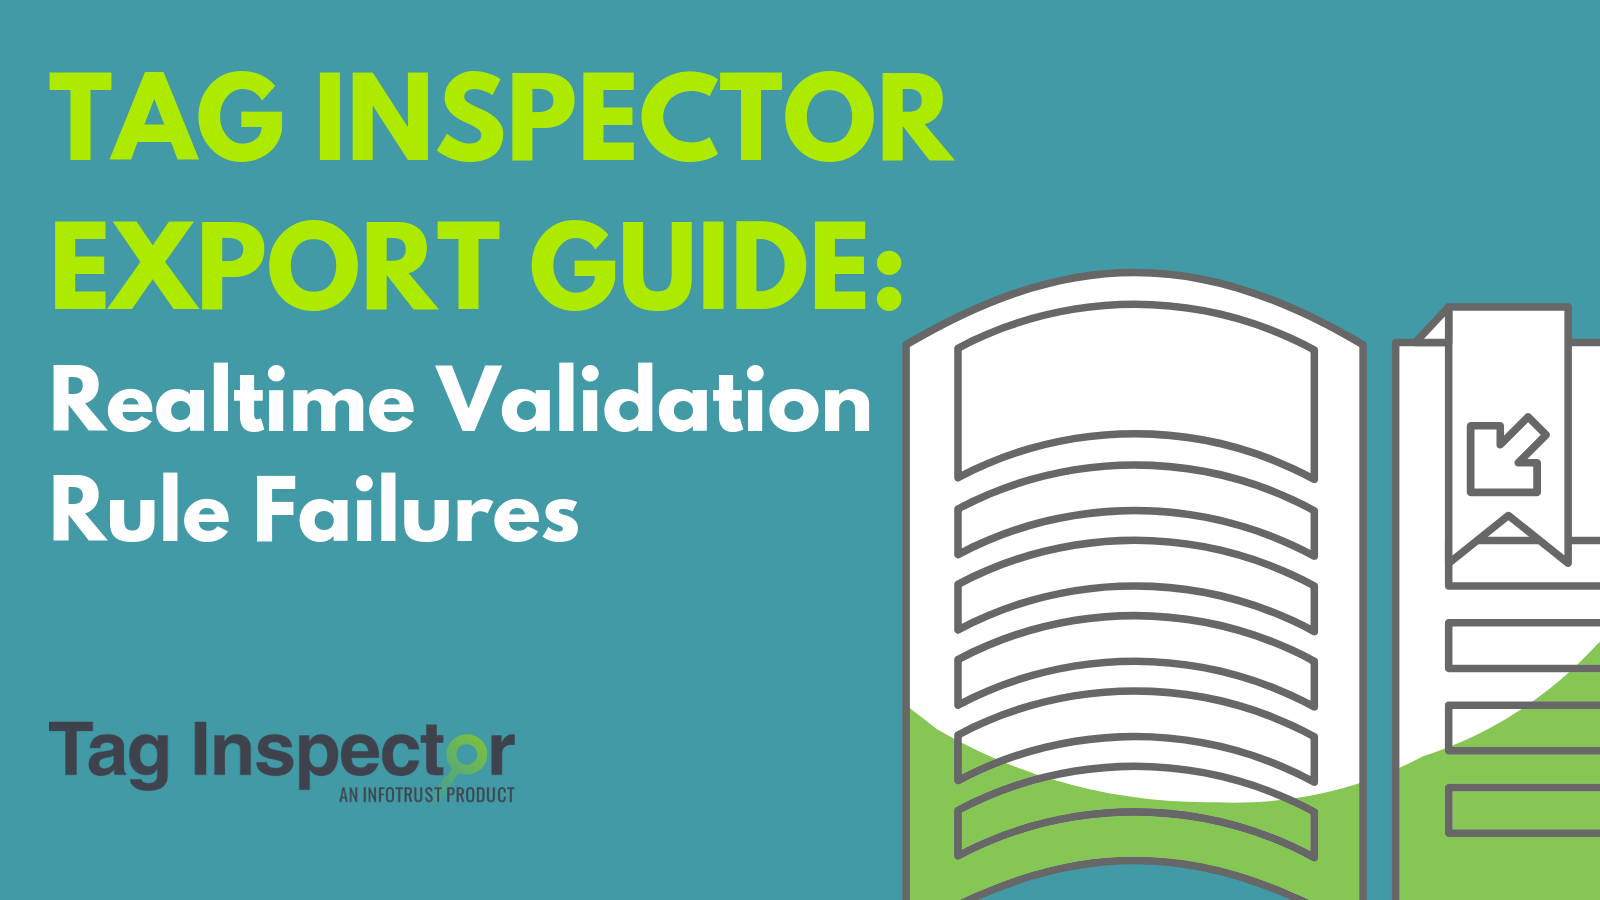 Tag Inspector Export Guide: Realtime Validation Rule Failures